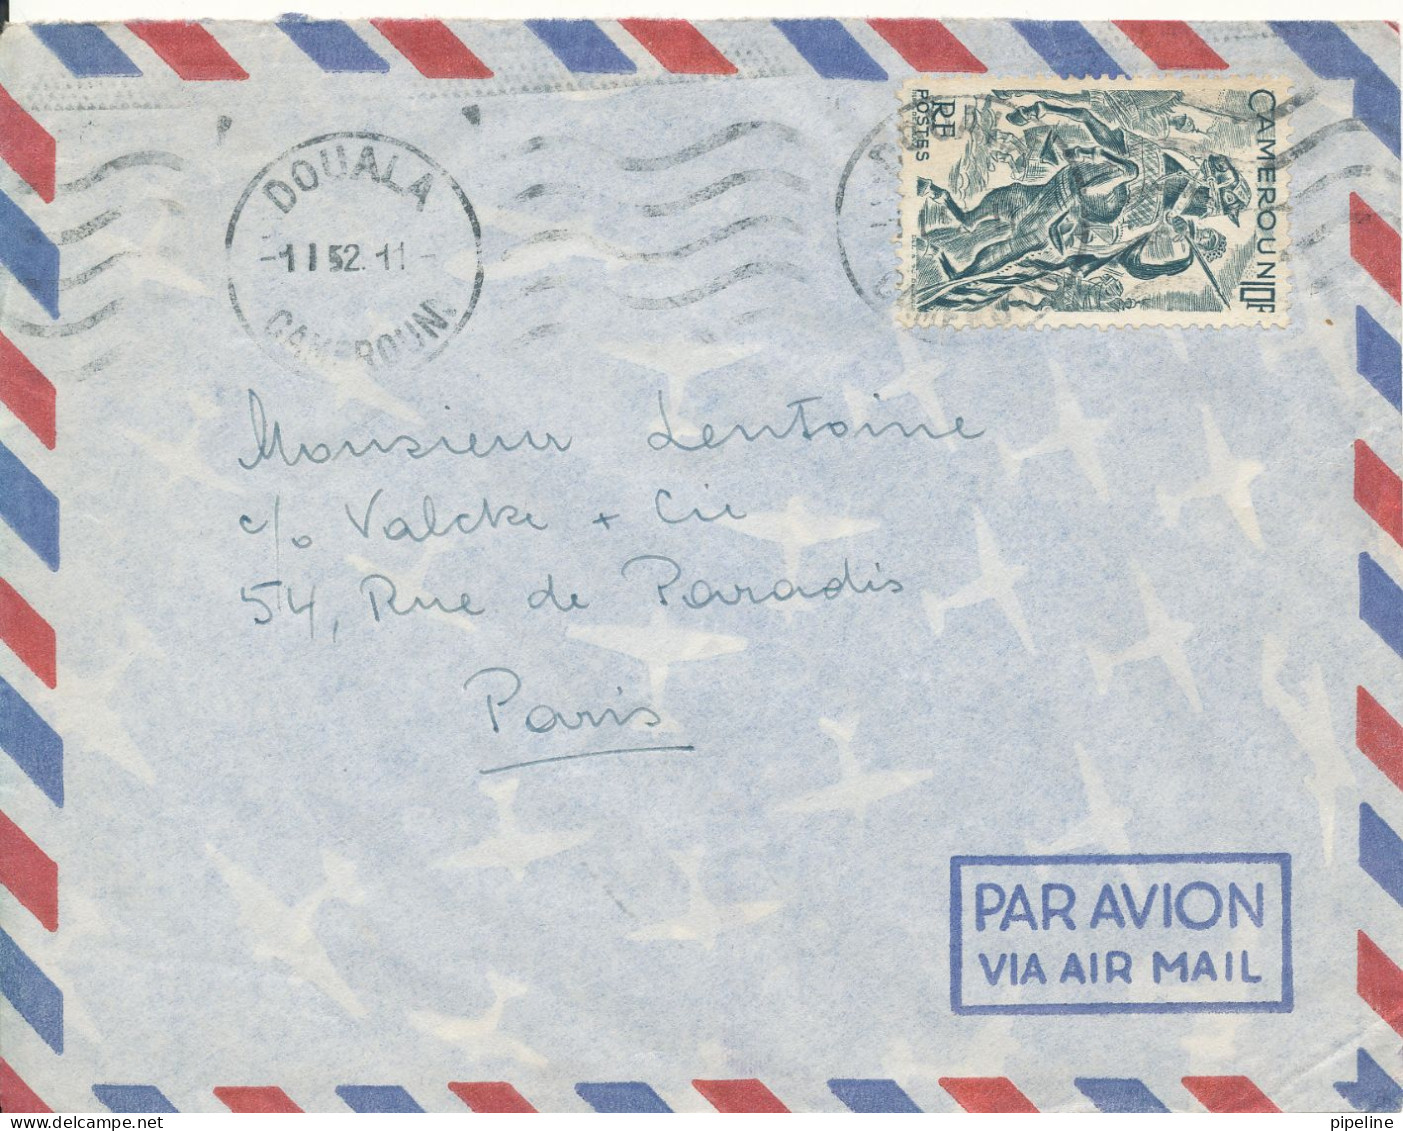 Cameroun Air Mail Cover Sent To France 1952 Single Franked - Airmail